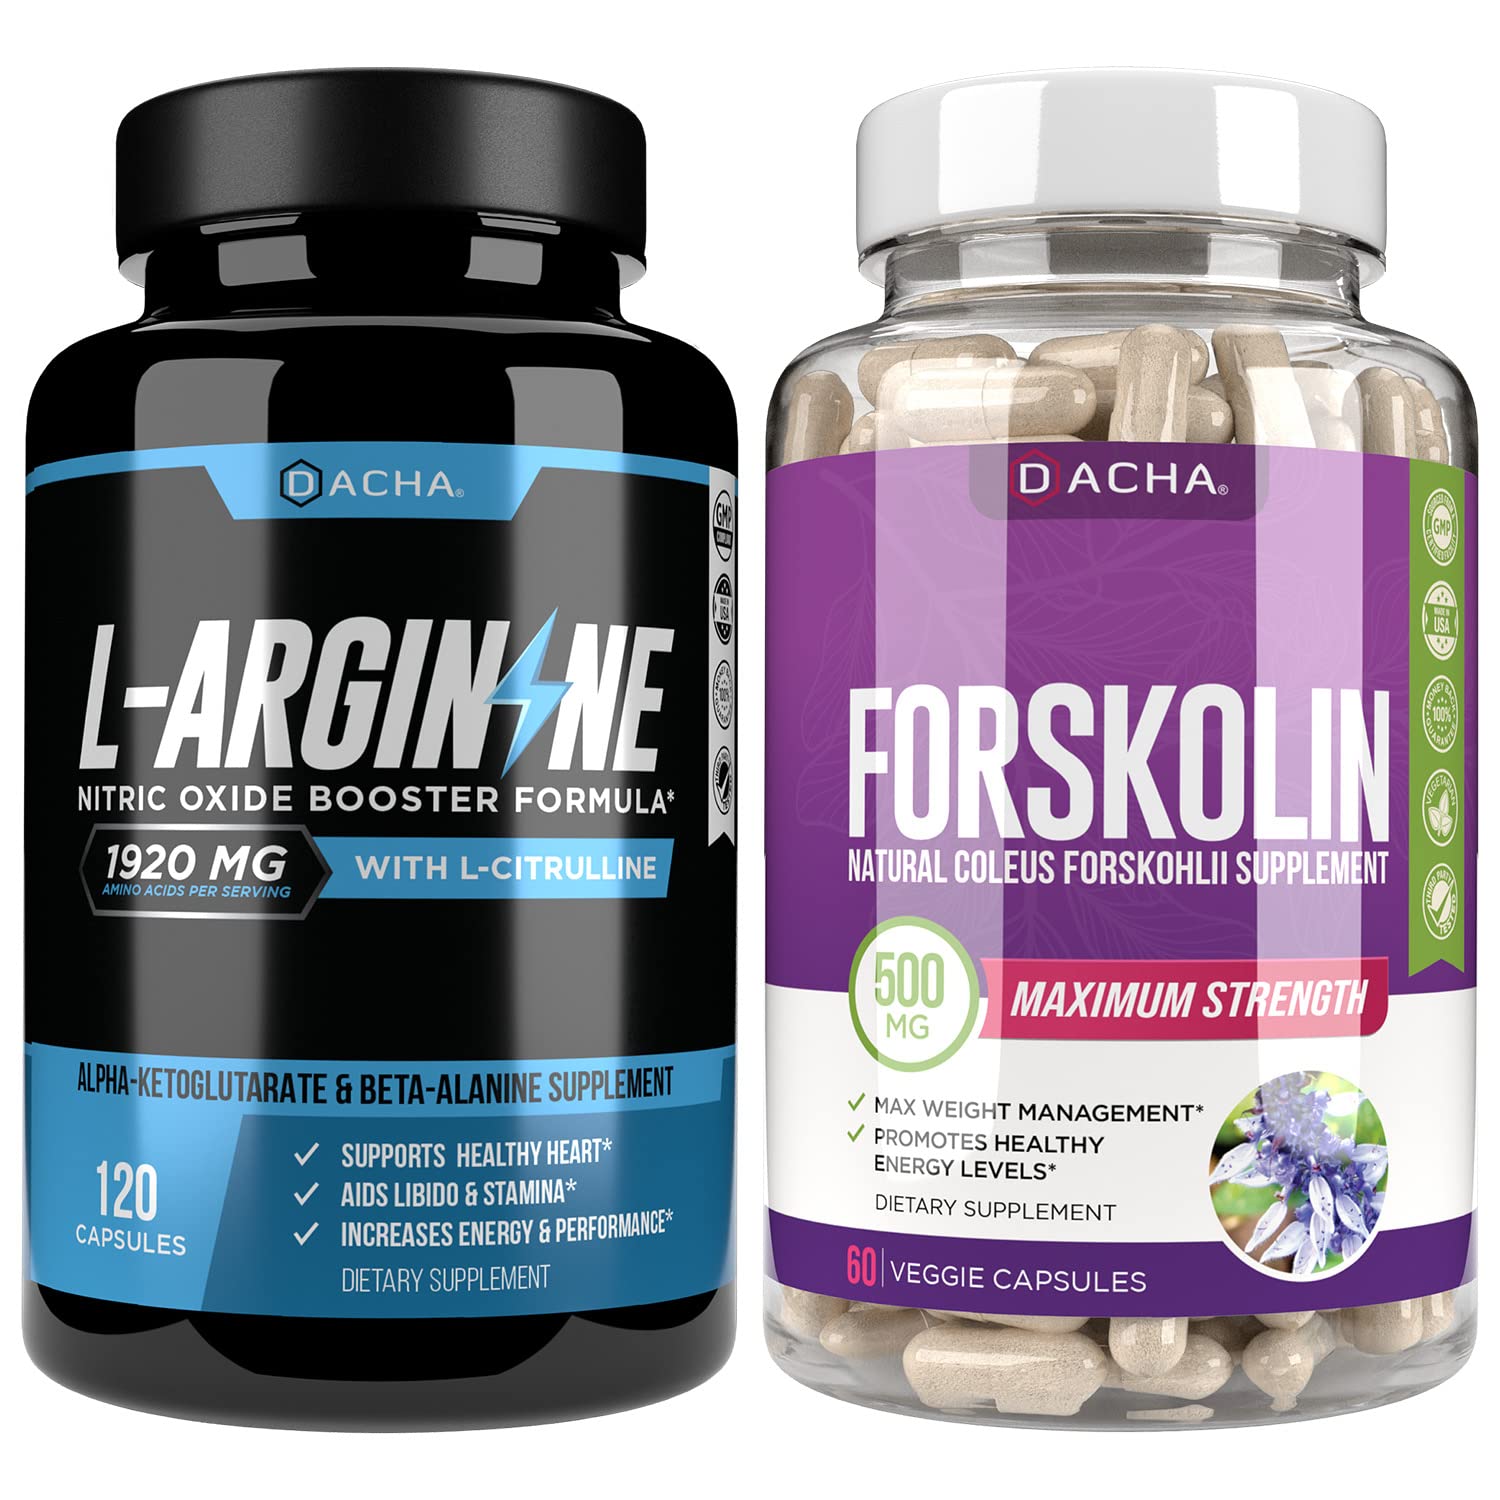 Ultimate Nitric Oxide Booster & Weight Loss Bundle – L-Arginine With Citrulline & Forskolin Extract, Potent Formula Natural Herbs For Bodybuilding, Exercise Performance, Energy Support, Max Slim Look